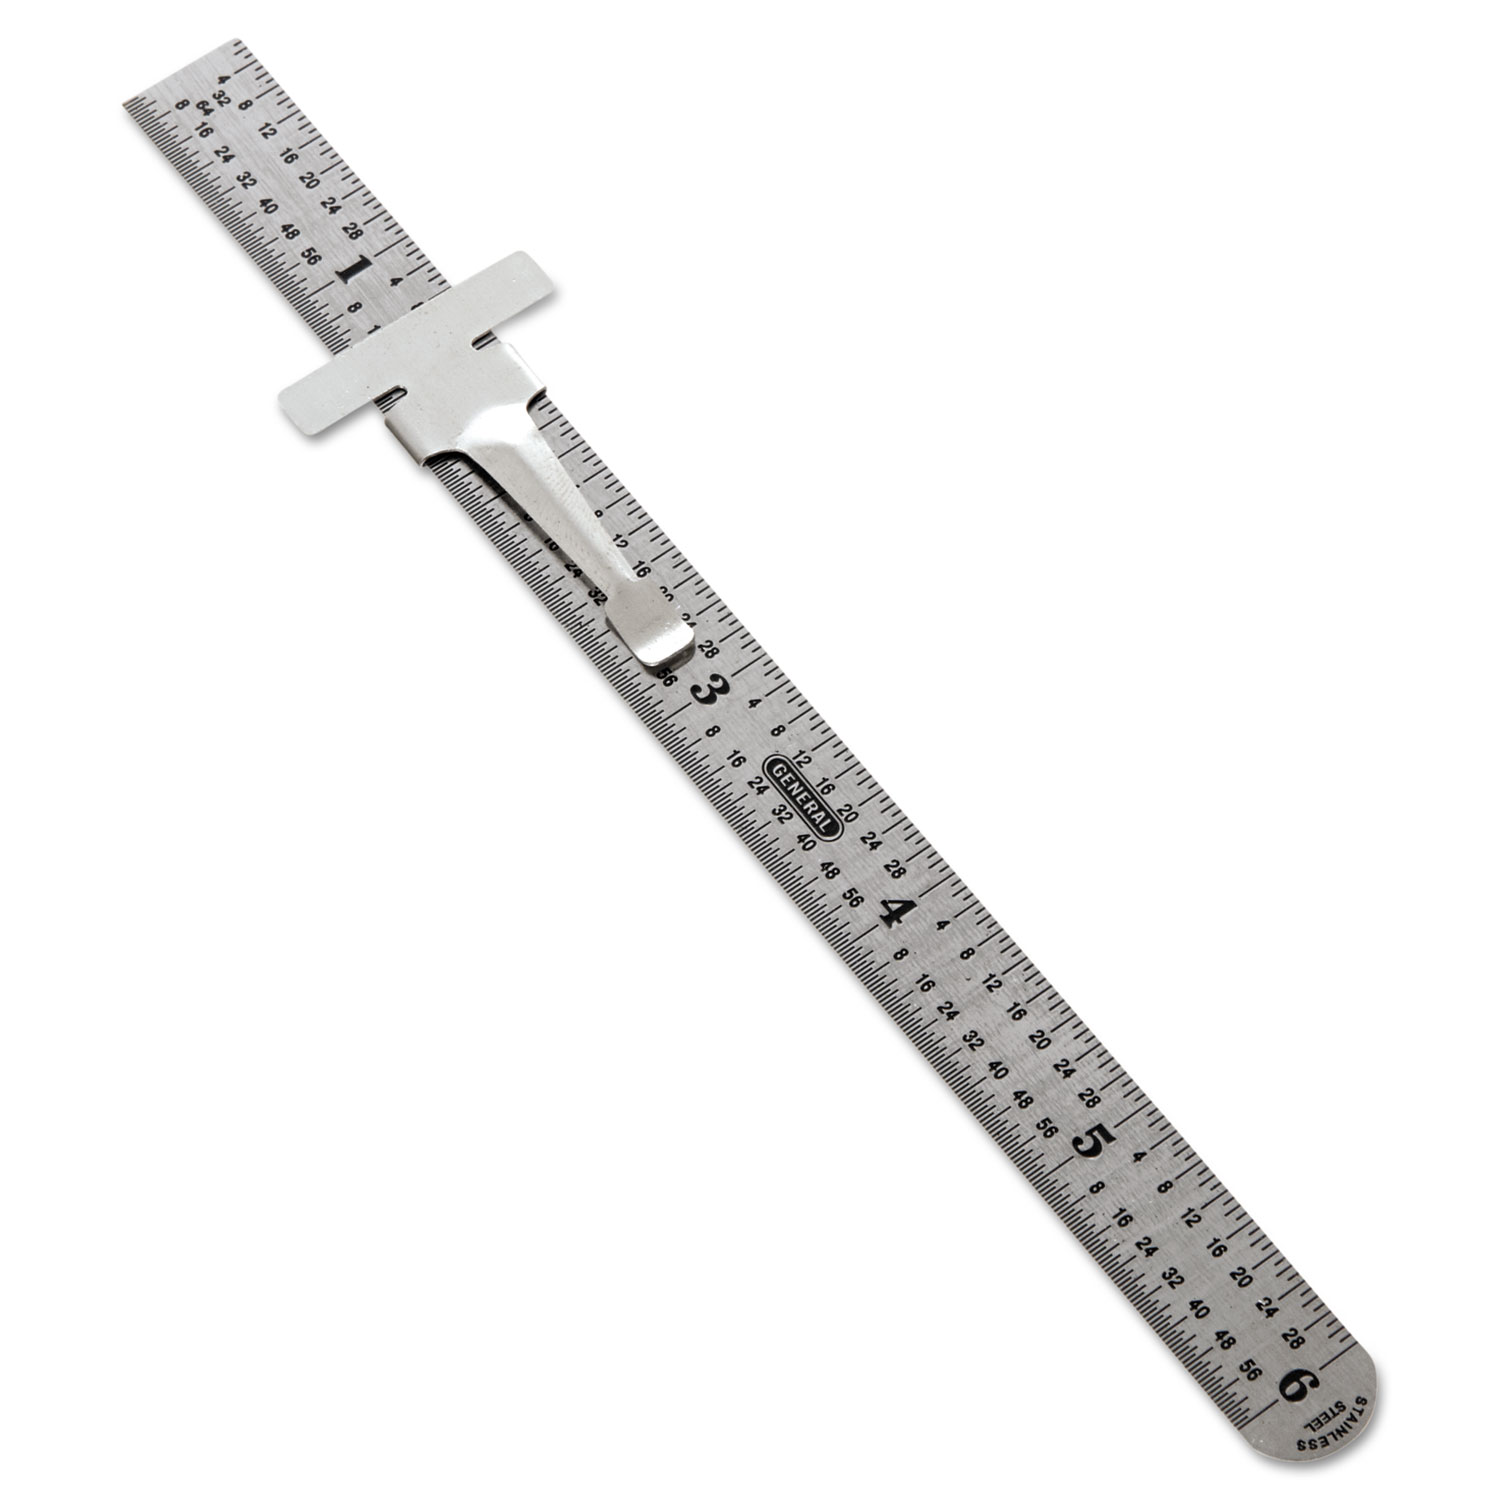 precision-stainless-steel-ruler-standard-metric-6-in-absolute